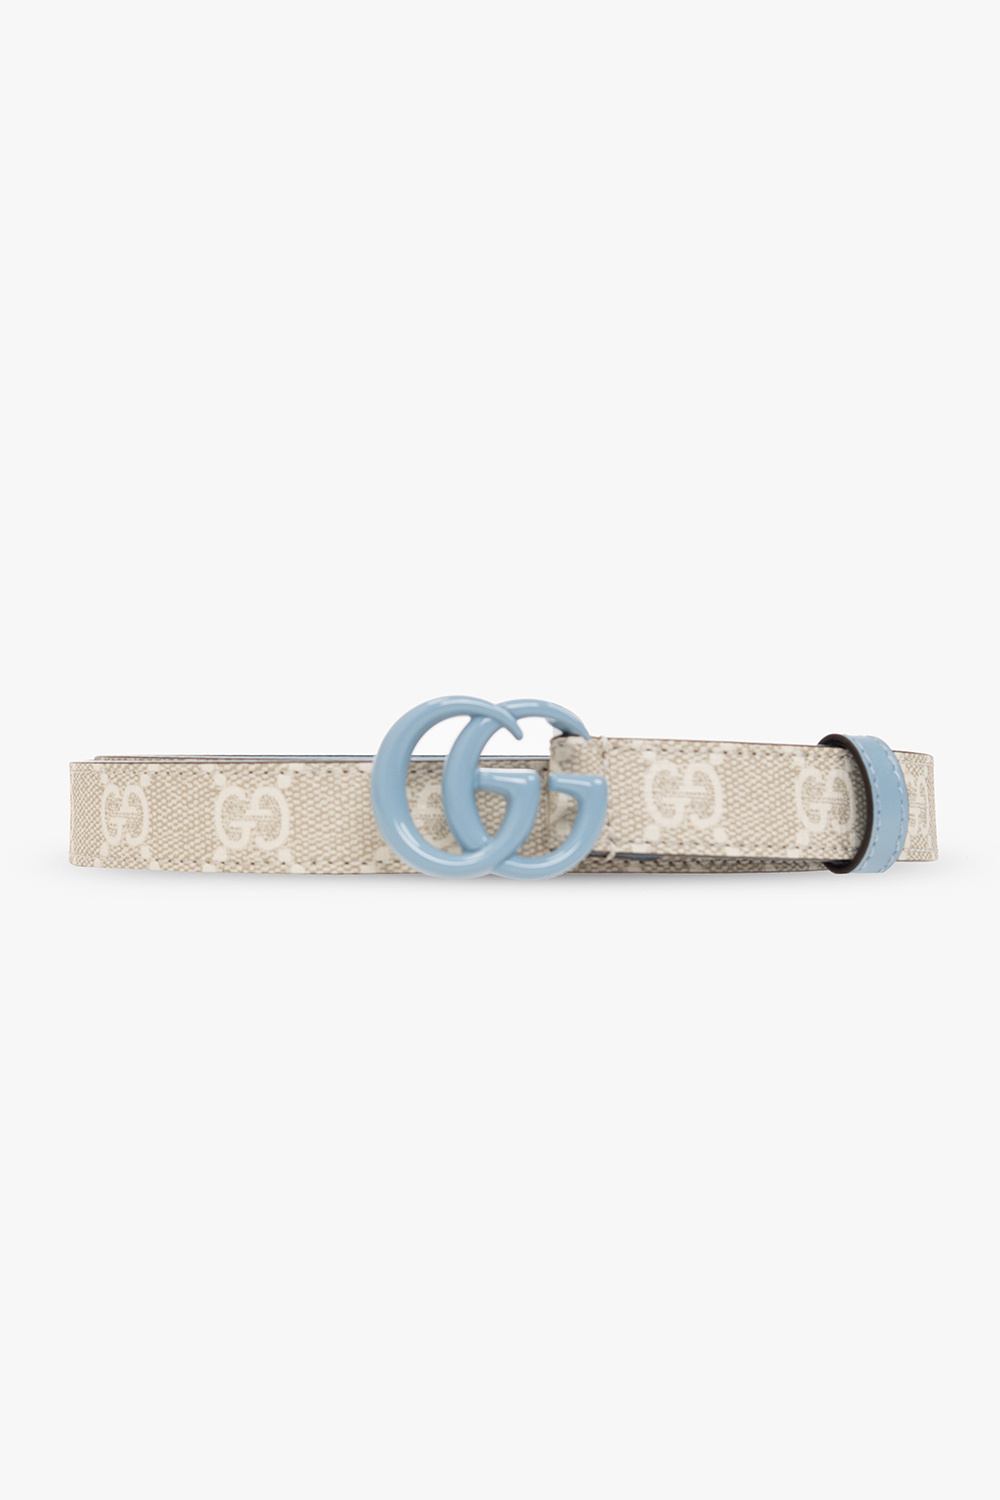 Gucci Width 2cm Leather Belt with Double G and White Crystals Buckle